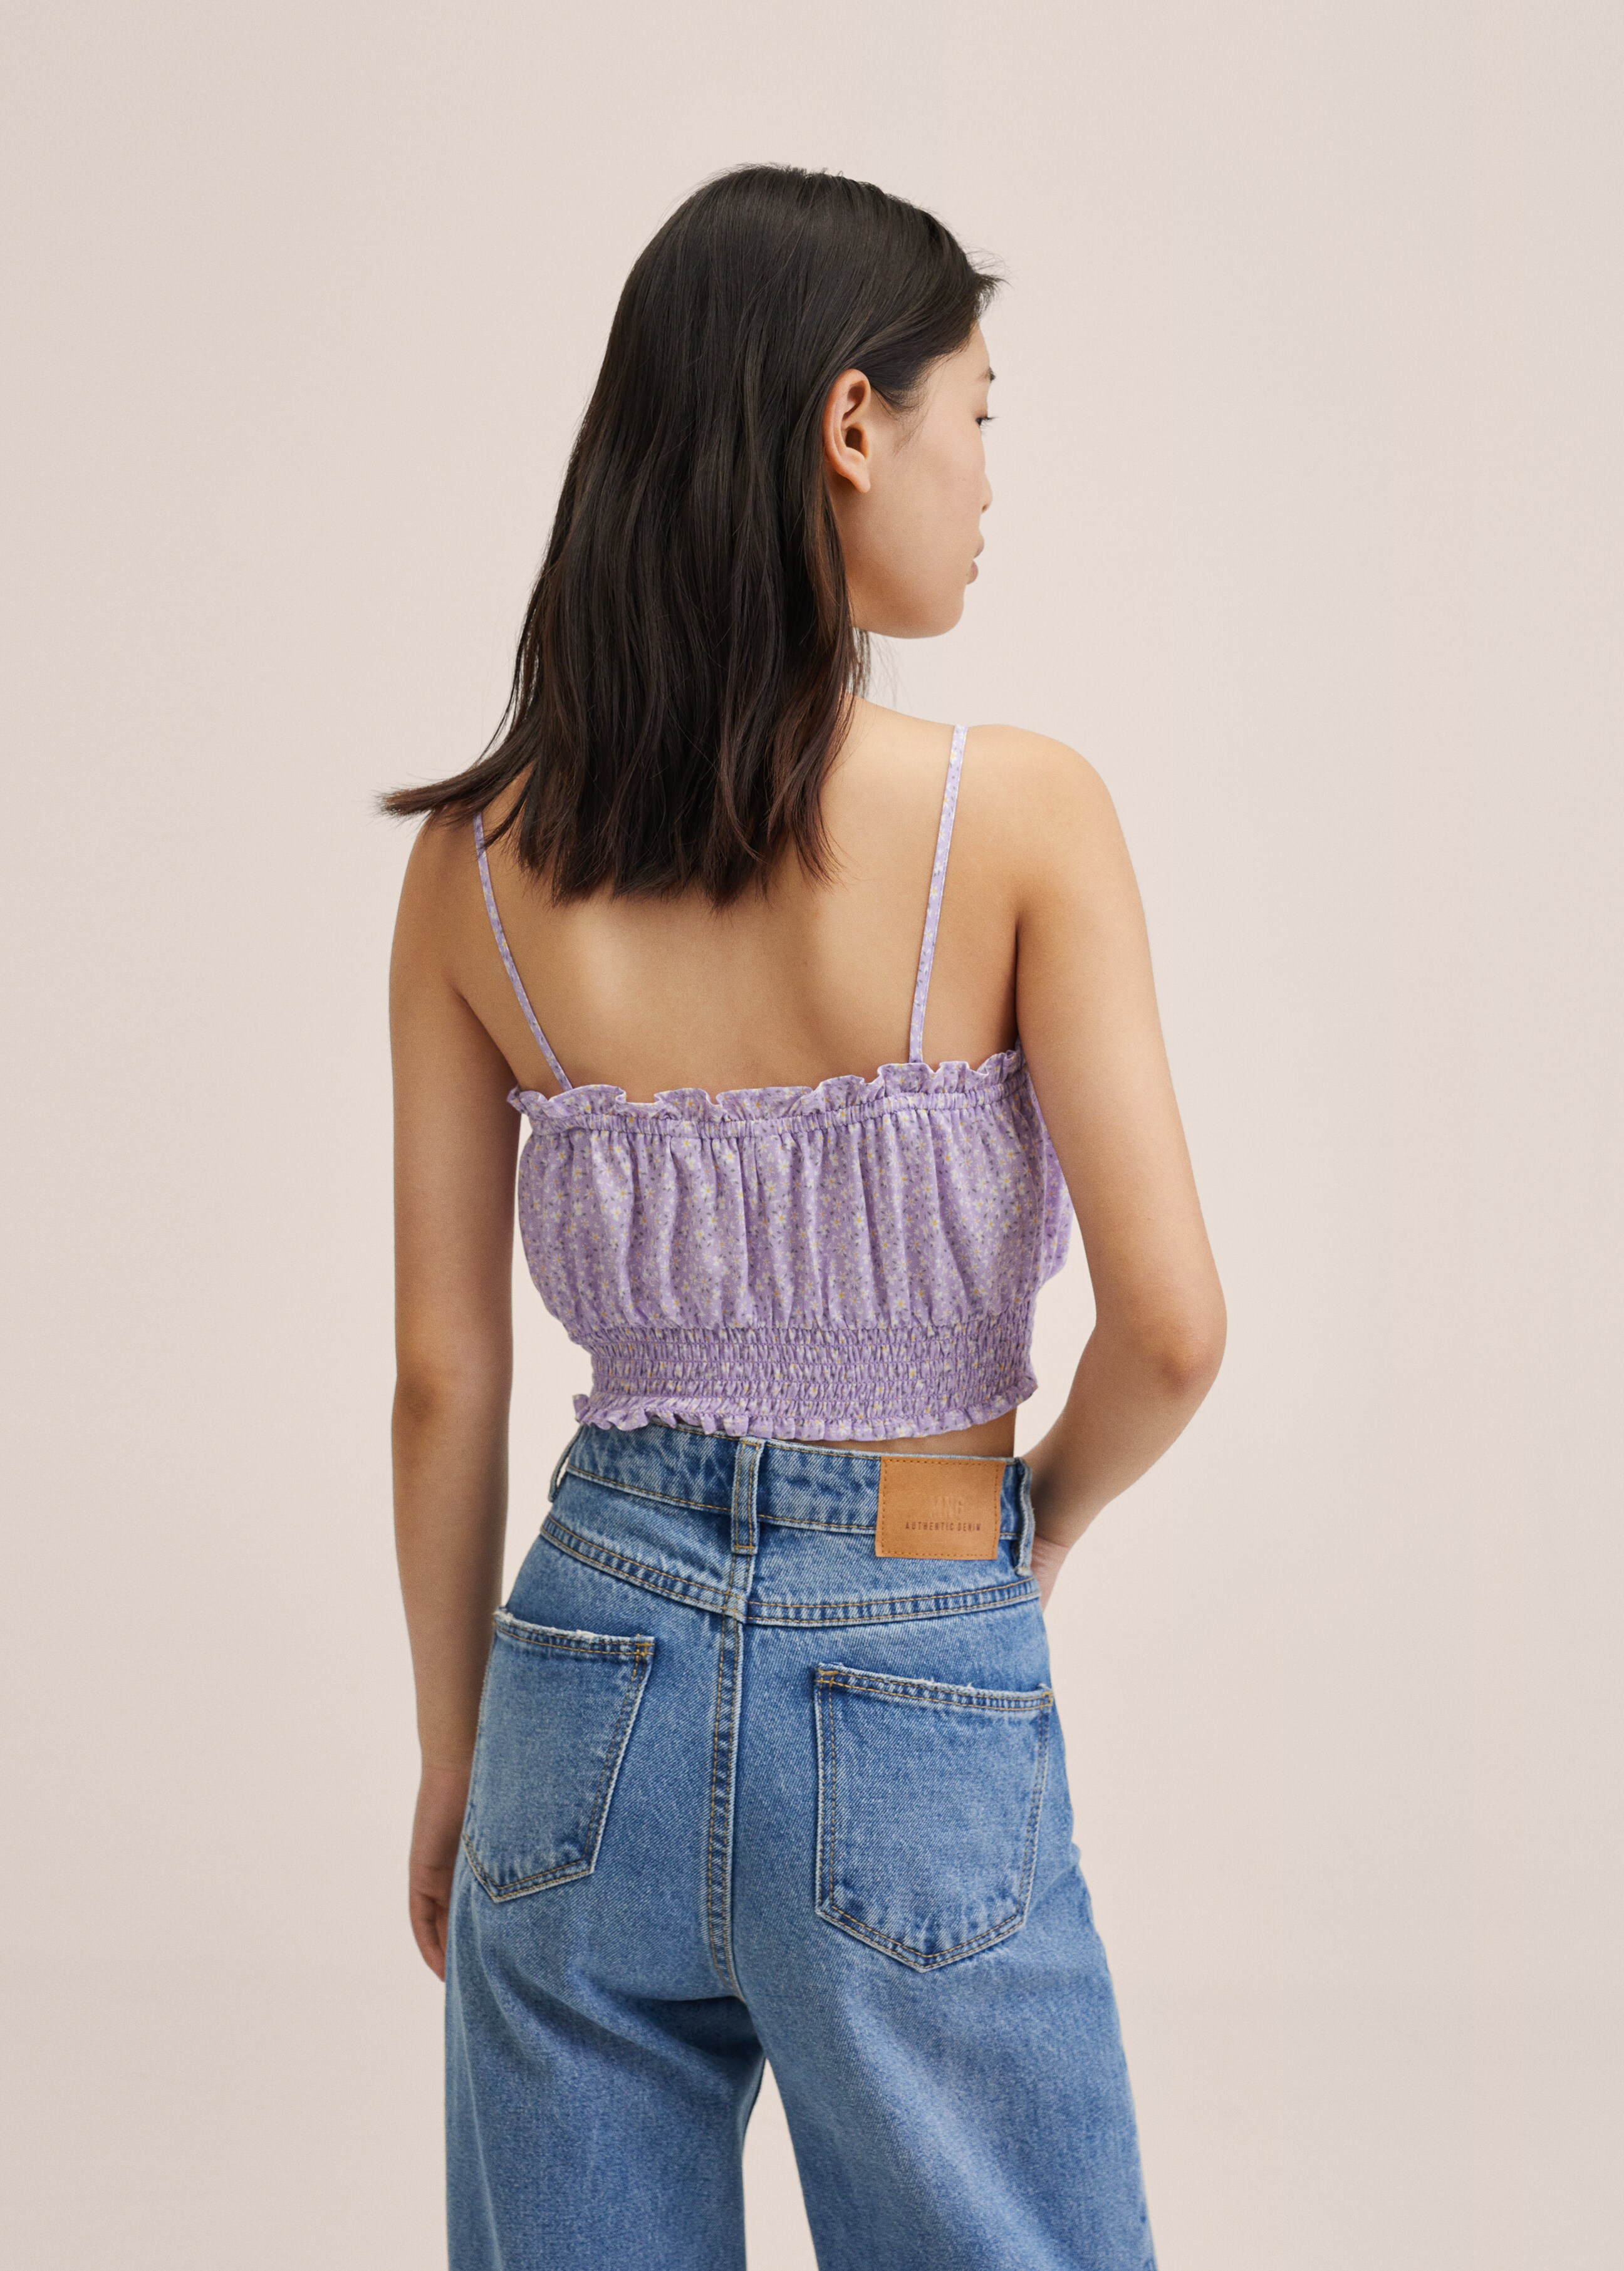 Floral crop top - Reverse of the article